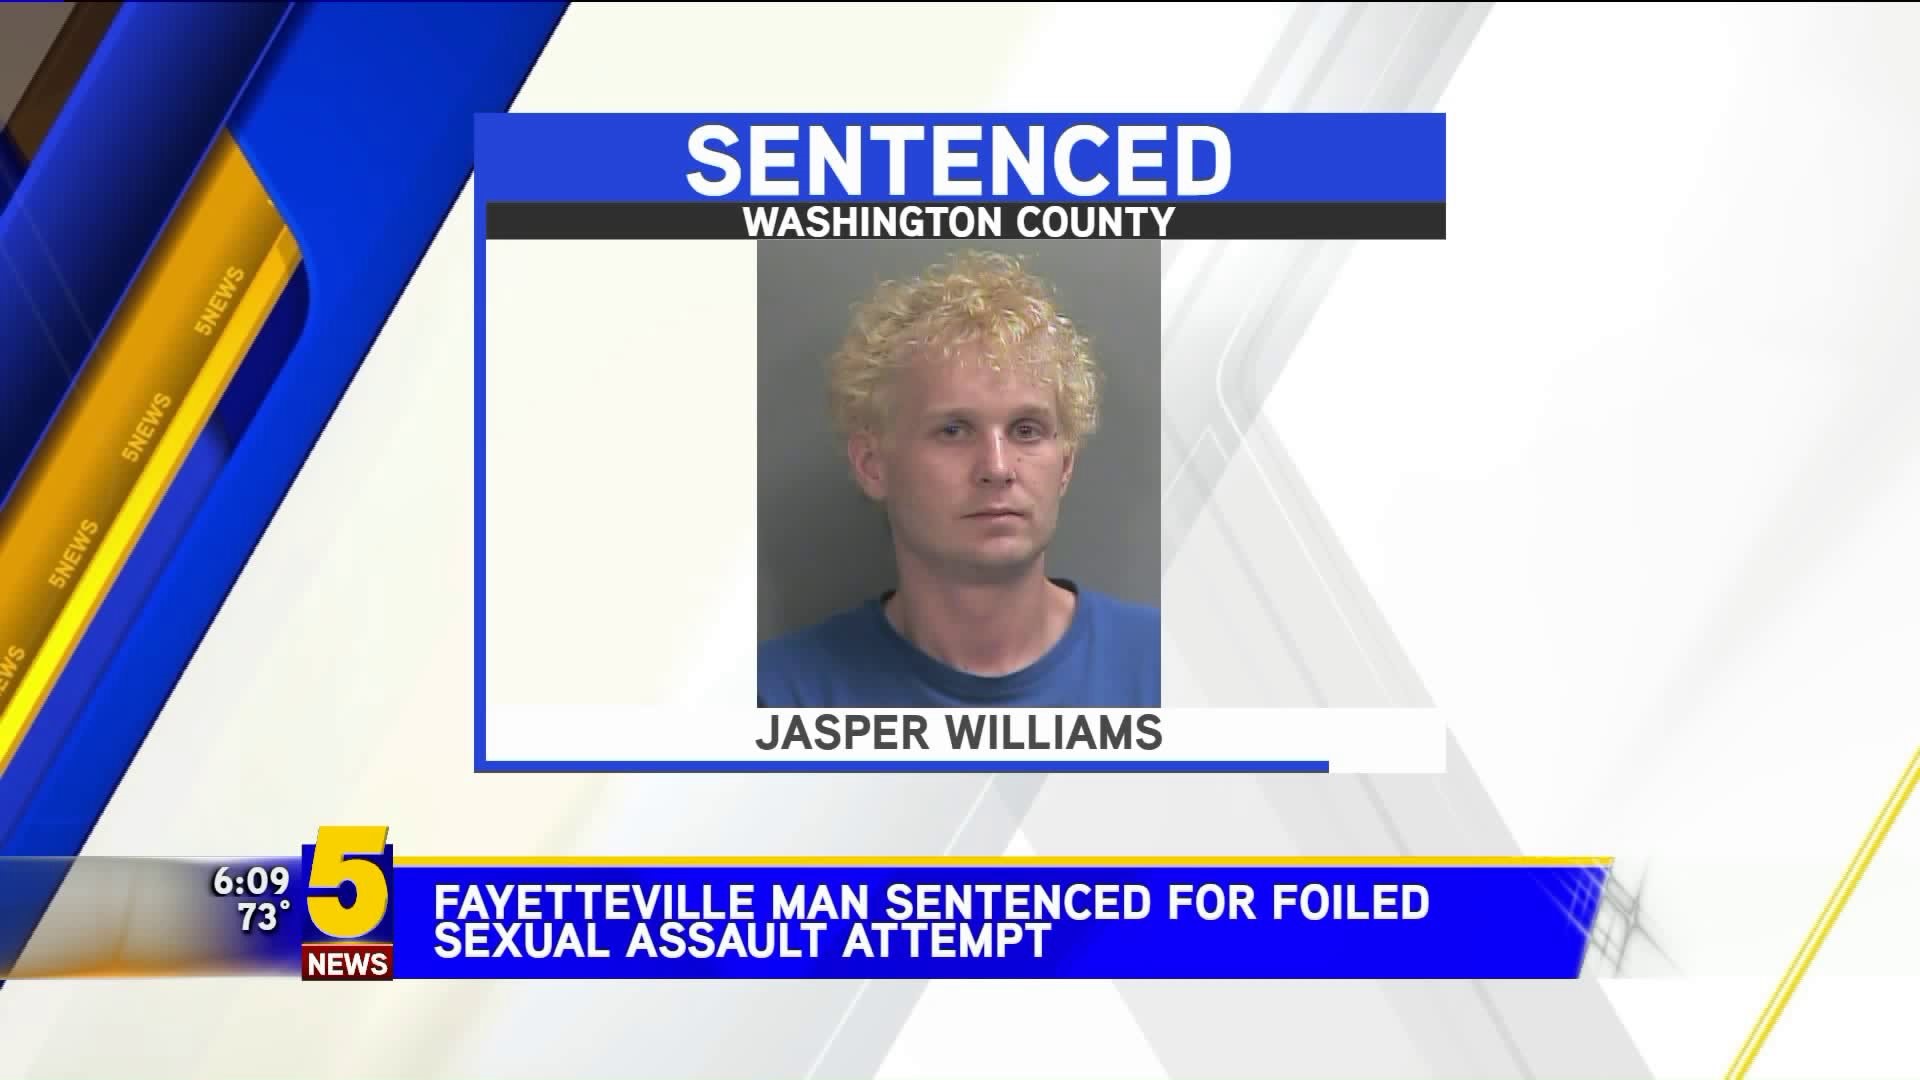 Fayetteville Man Sentence For Foiled Sexual Assault Attempt